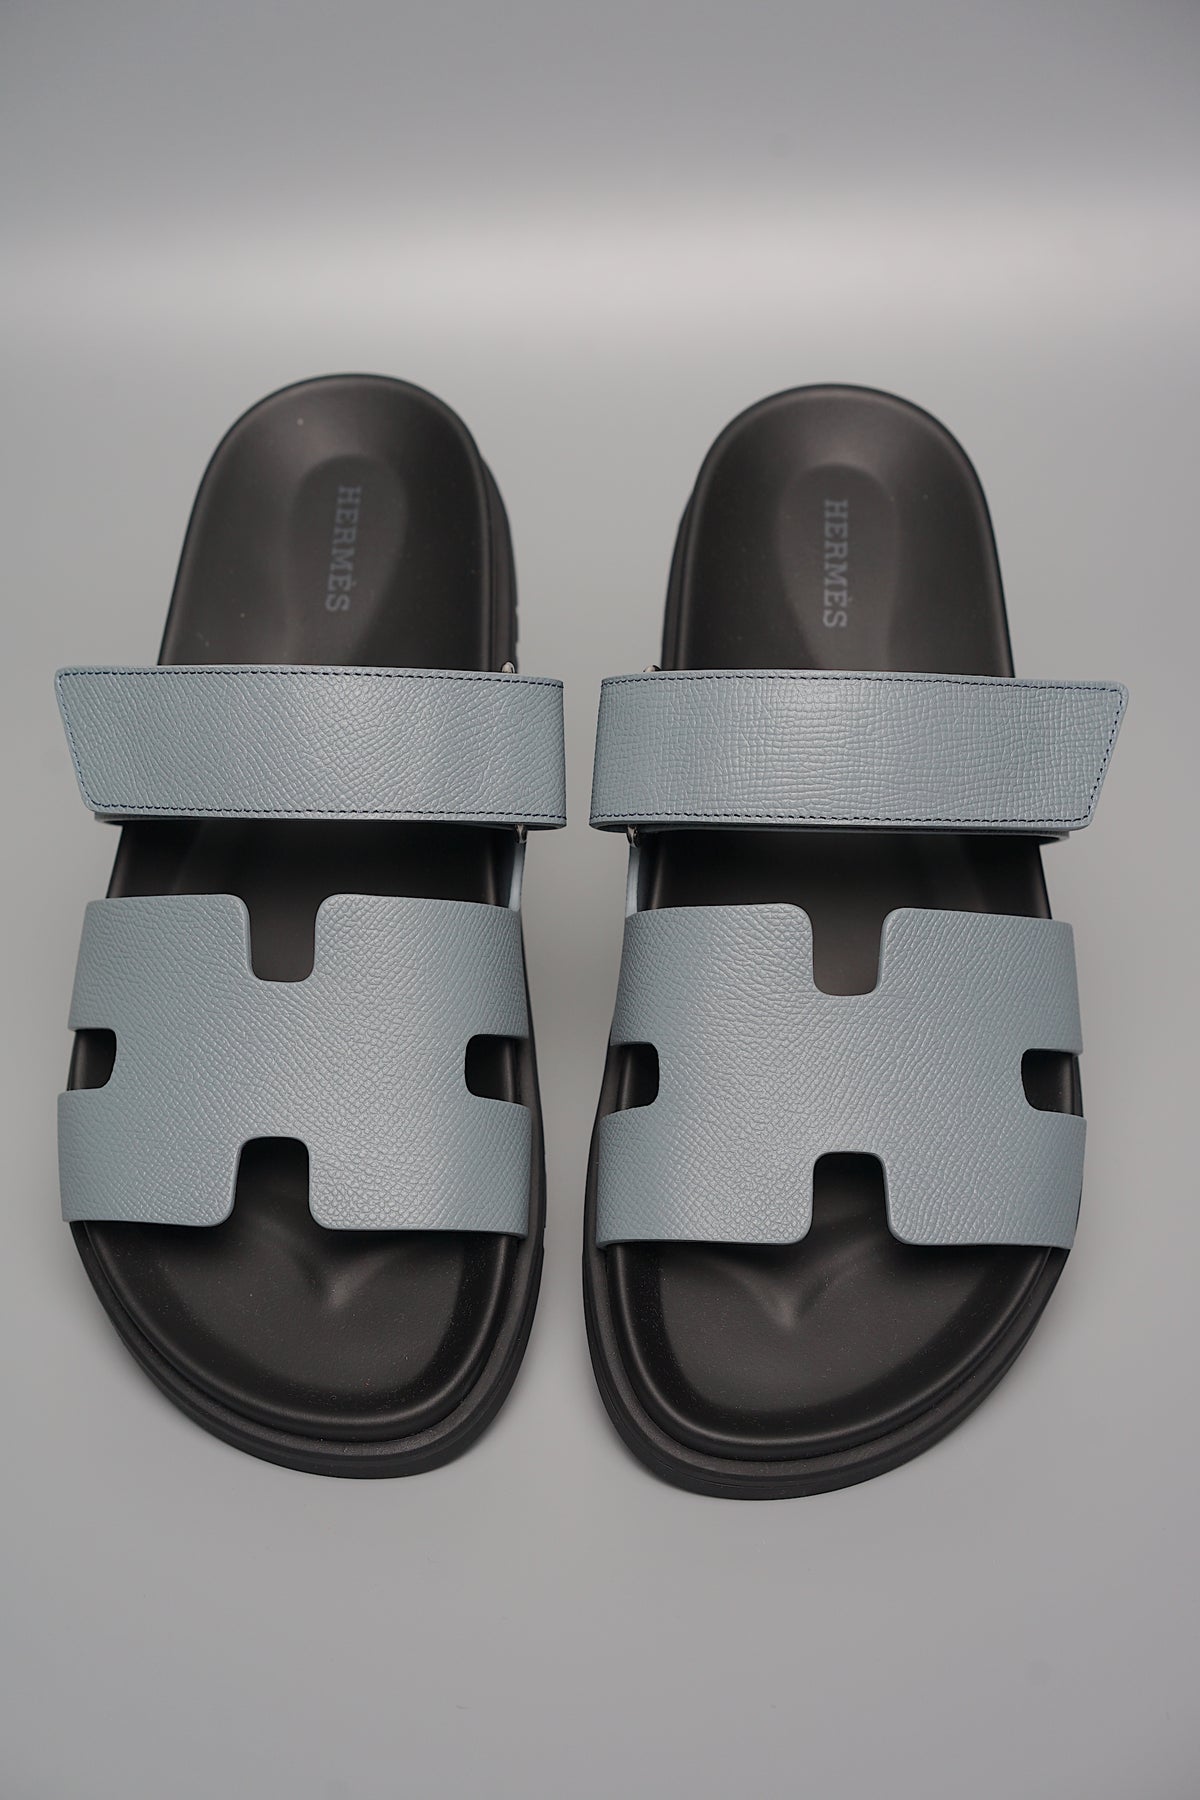 hermes chypre Mens sandals brand new size 41 in blue canard colour